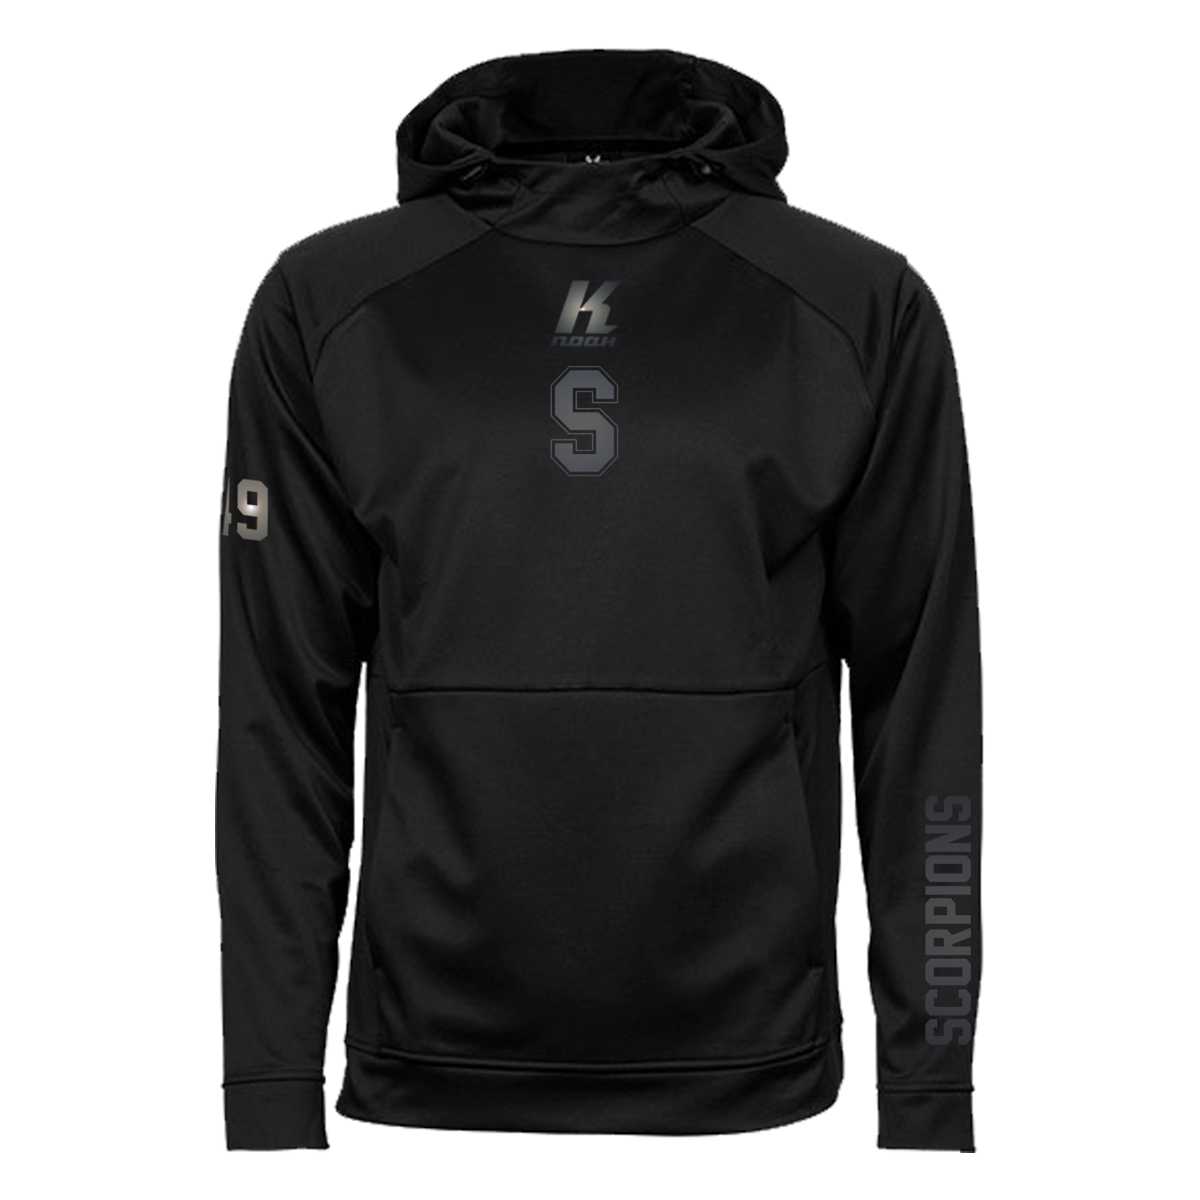 Scorpions "Blackline" Performance Hoodie JH006 with Playernumber or Initials